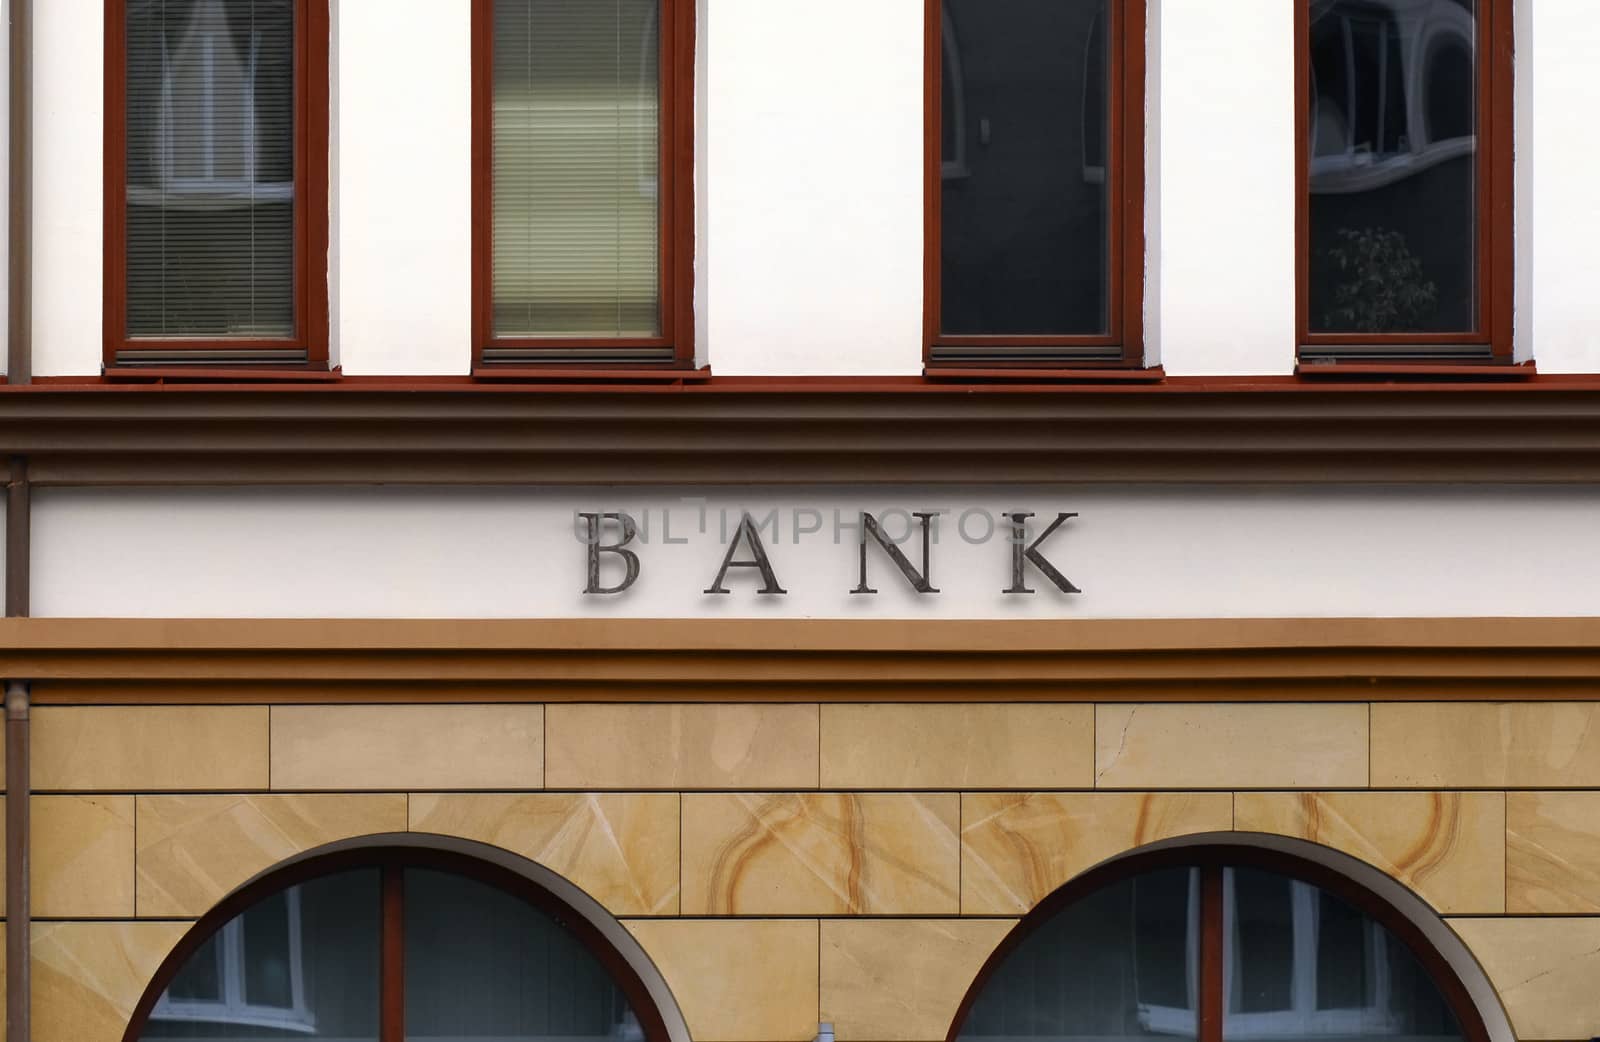 Small branch bank facade detail. No logo, only BANK letters.